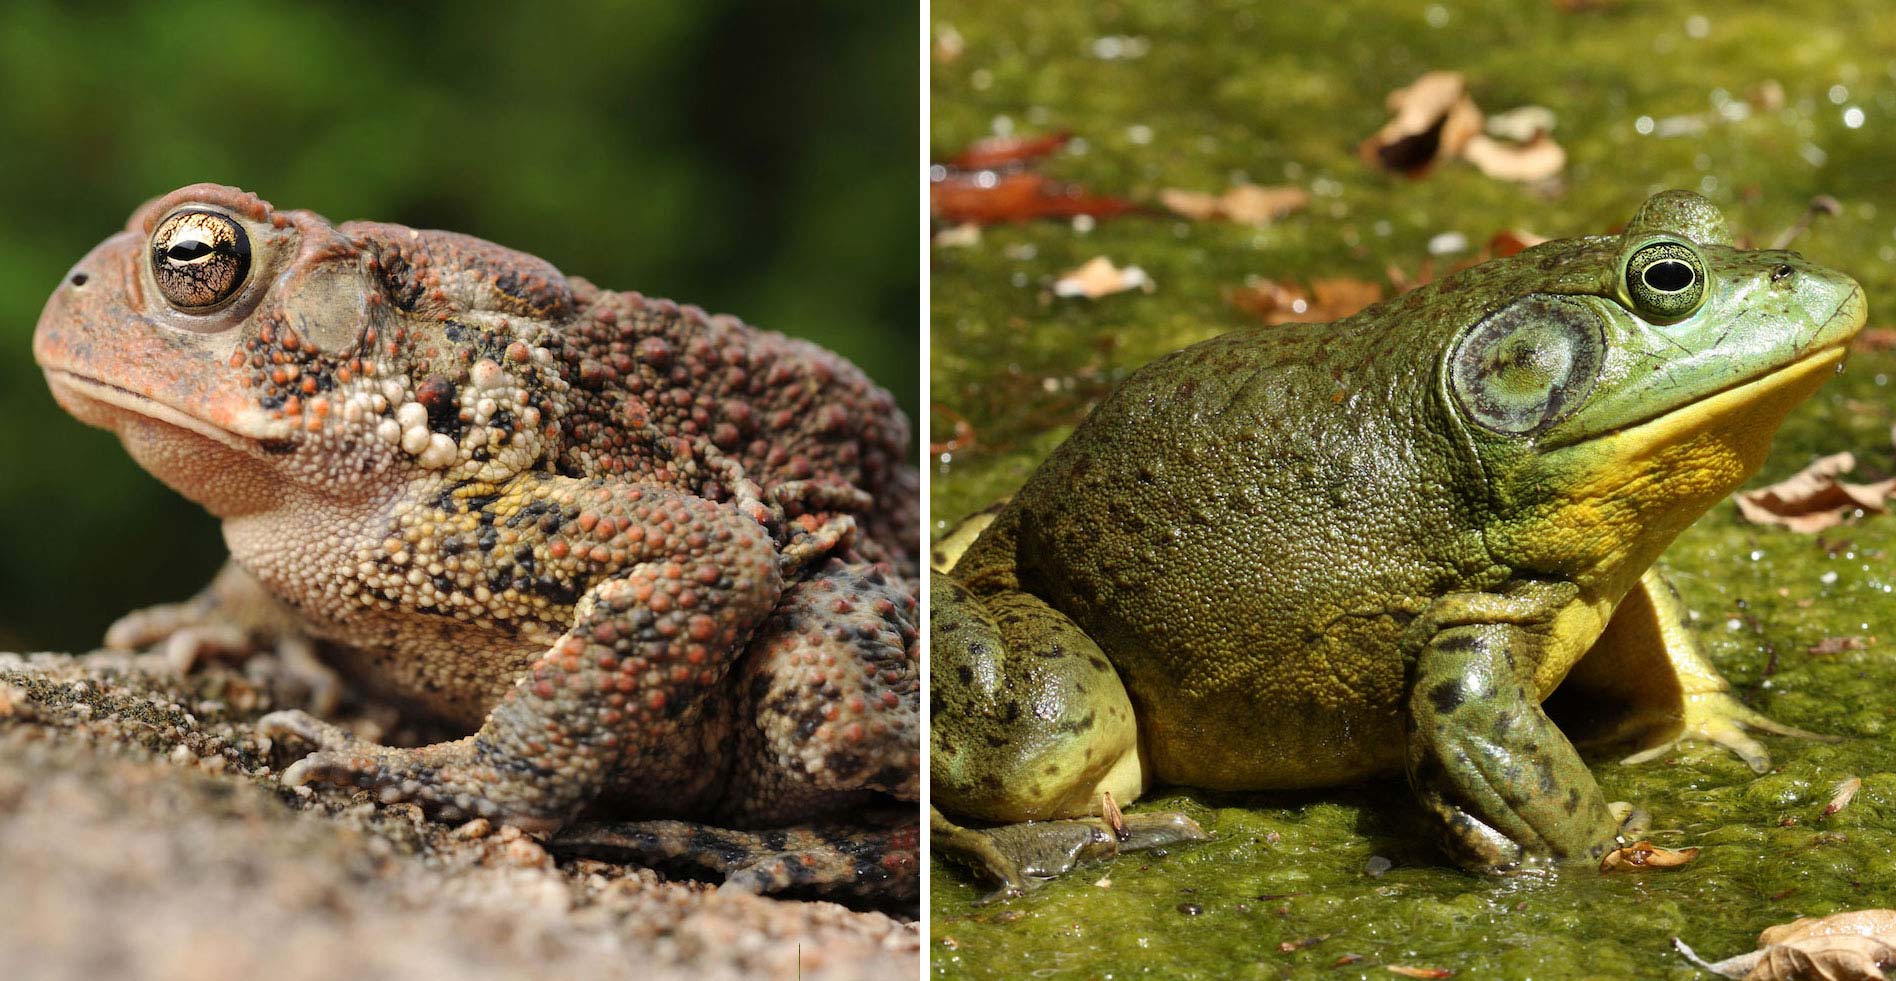 A side by side comparison of a frog and toad